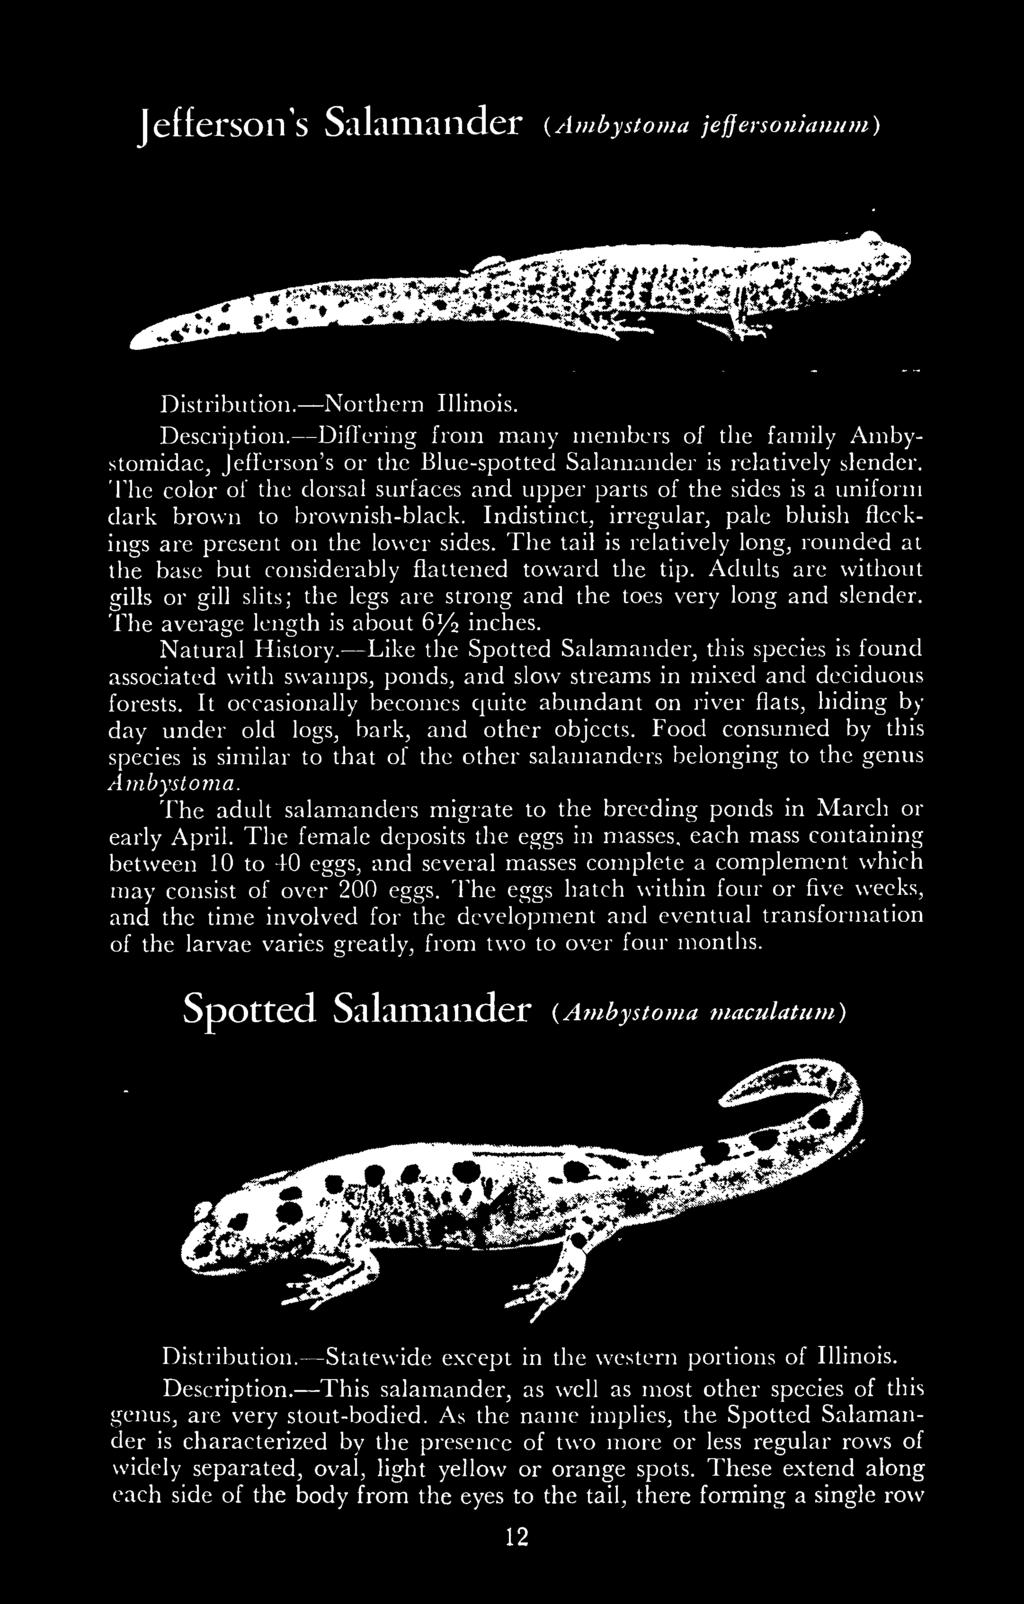 The average length is about 6/2 inches. Natural History. Like the Spotted Salamander, this species is found associated with swamps, ponds, and slow streams in mixed and deciduous forests.